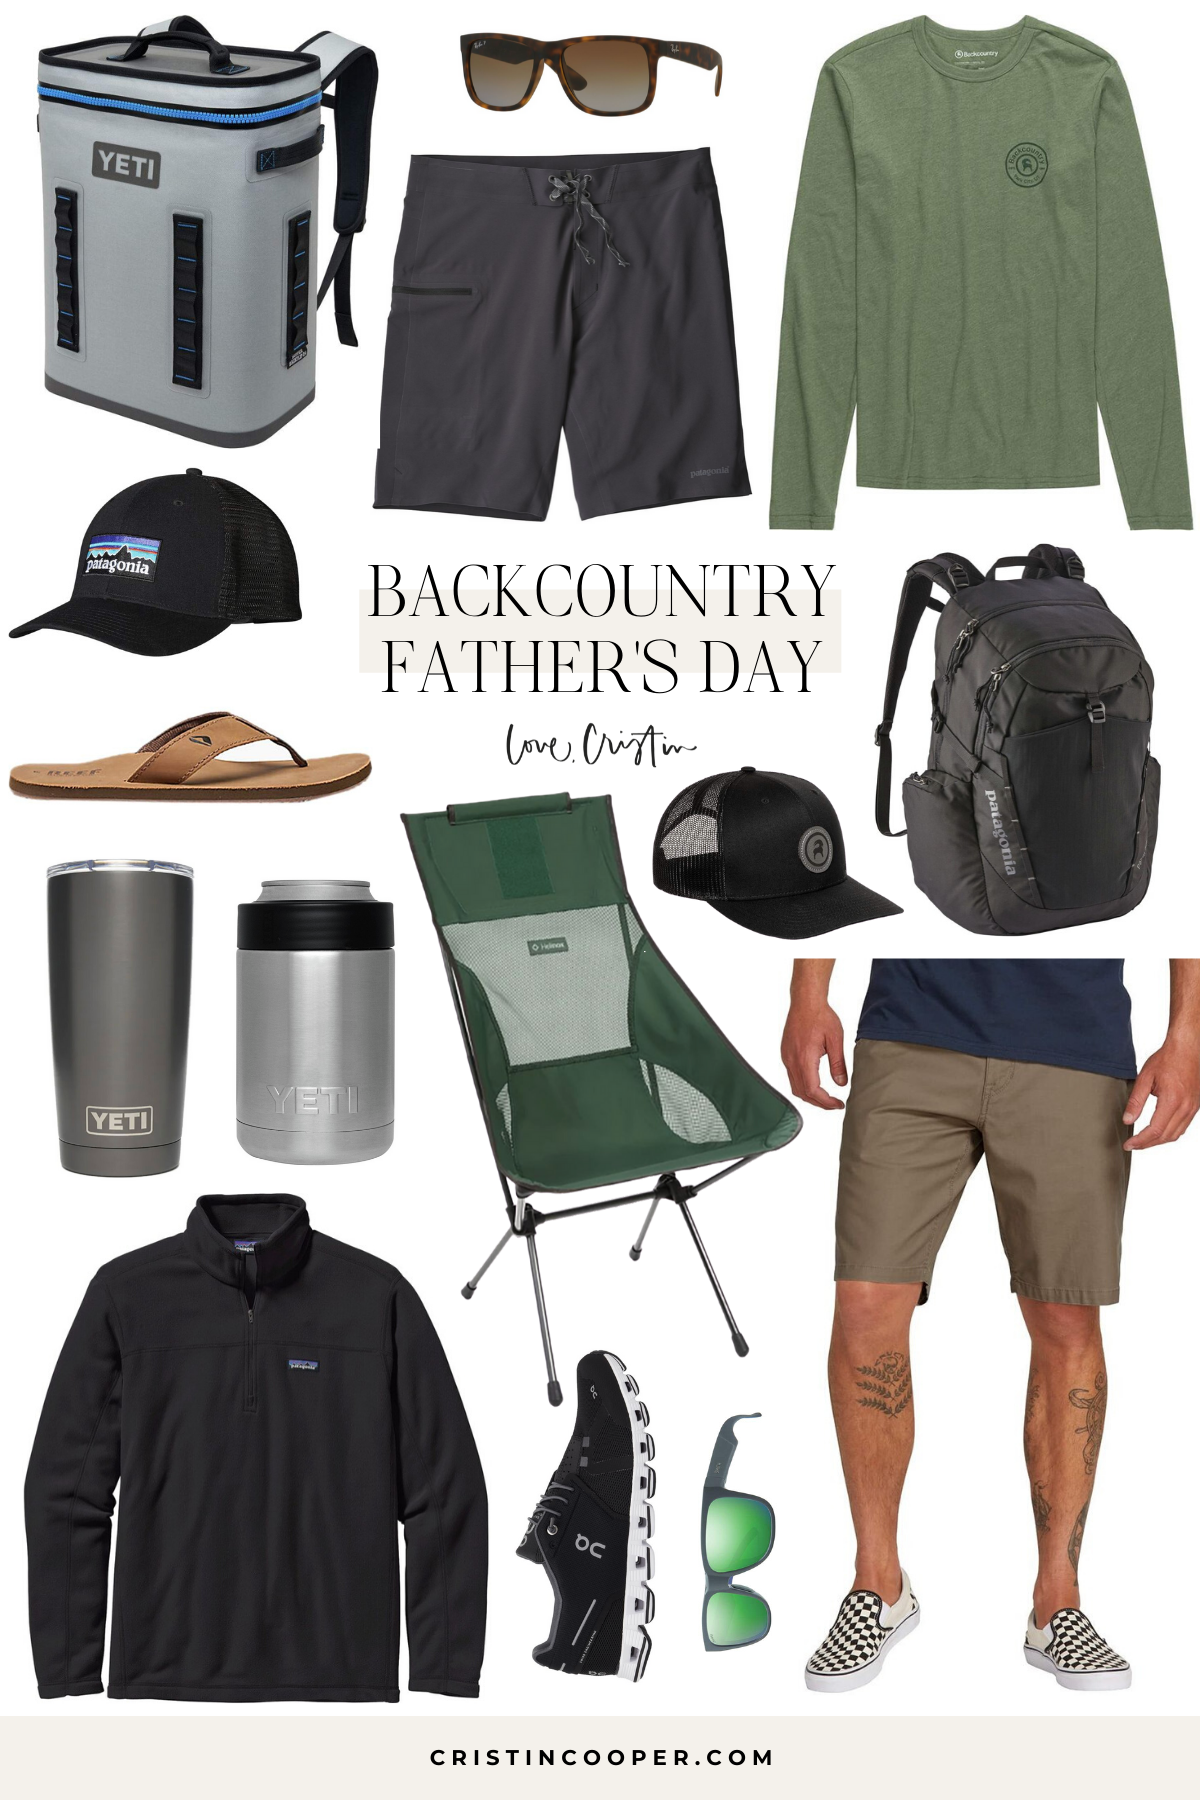 Outdoor Father's Day Gifts from Backcountry